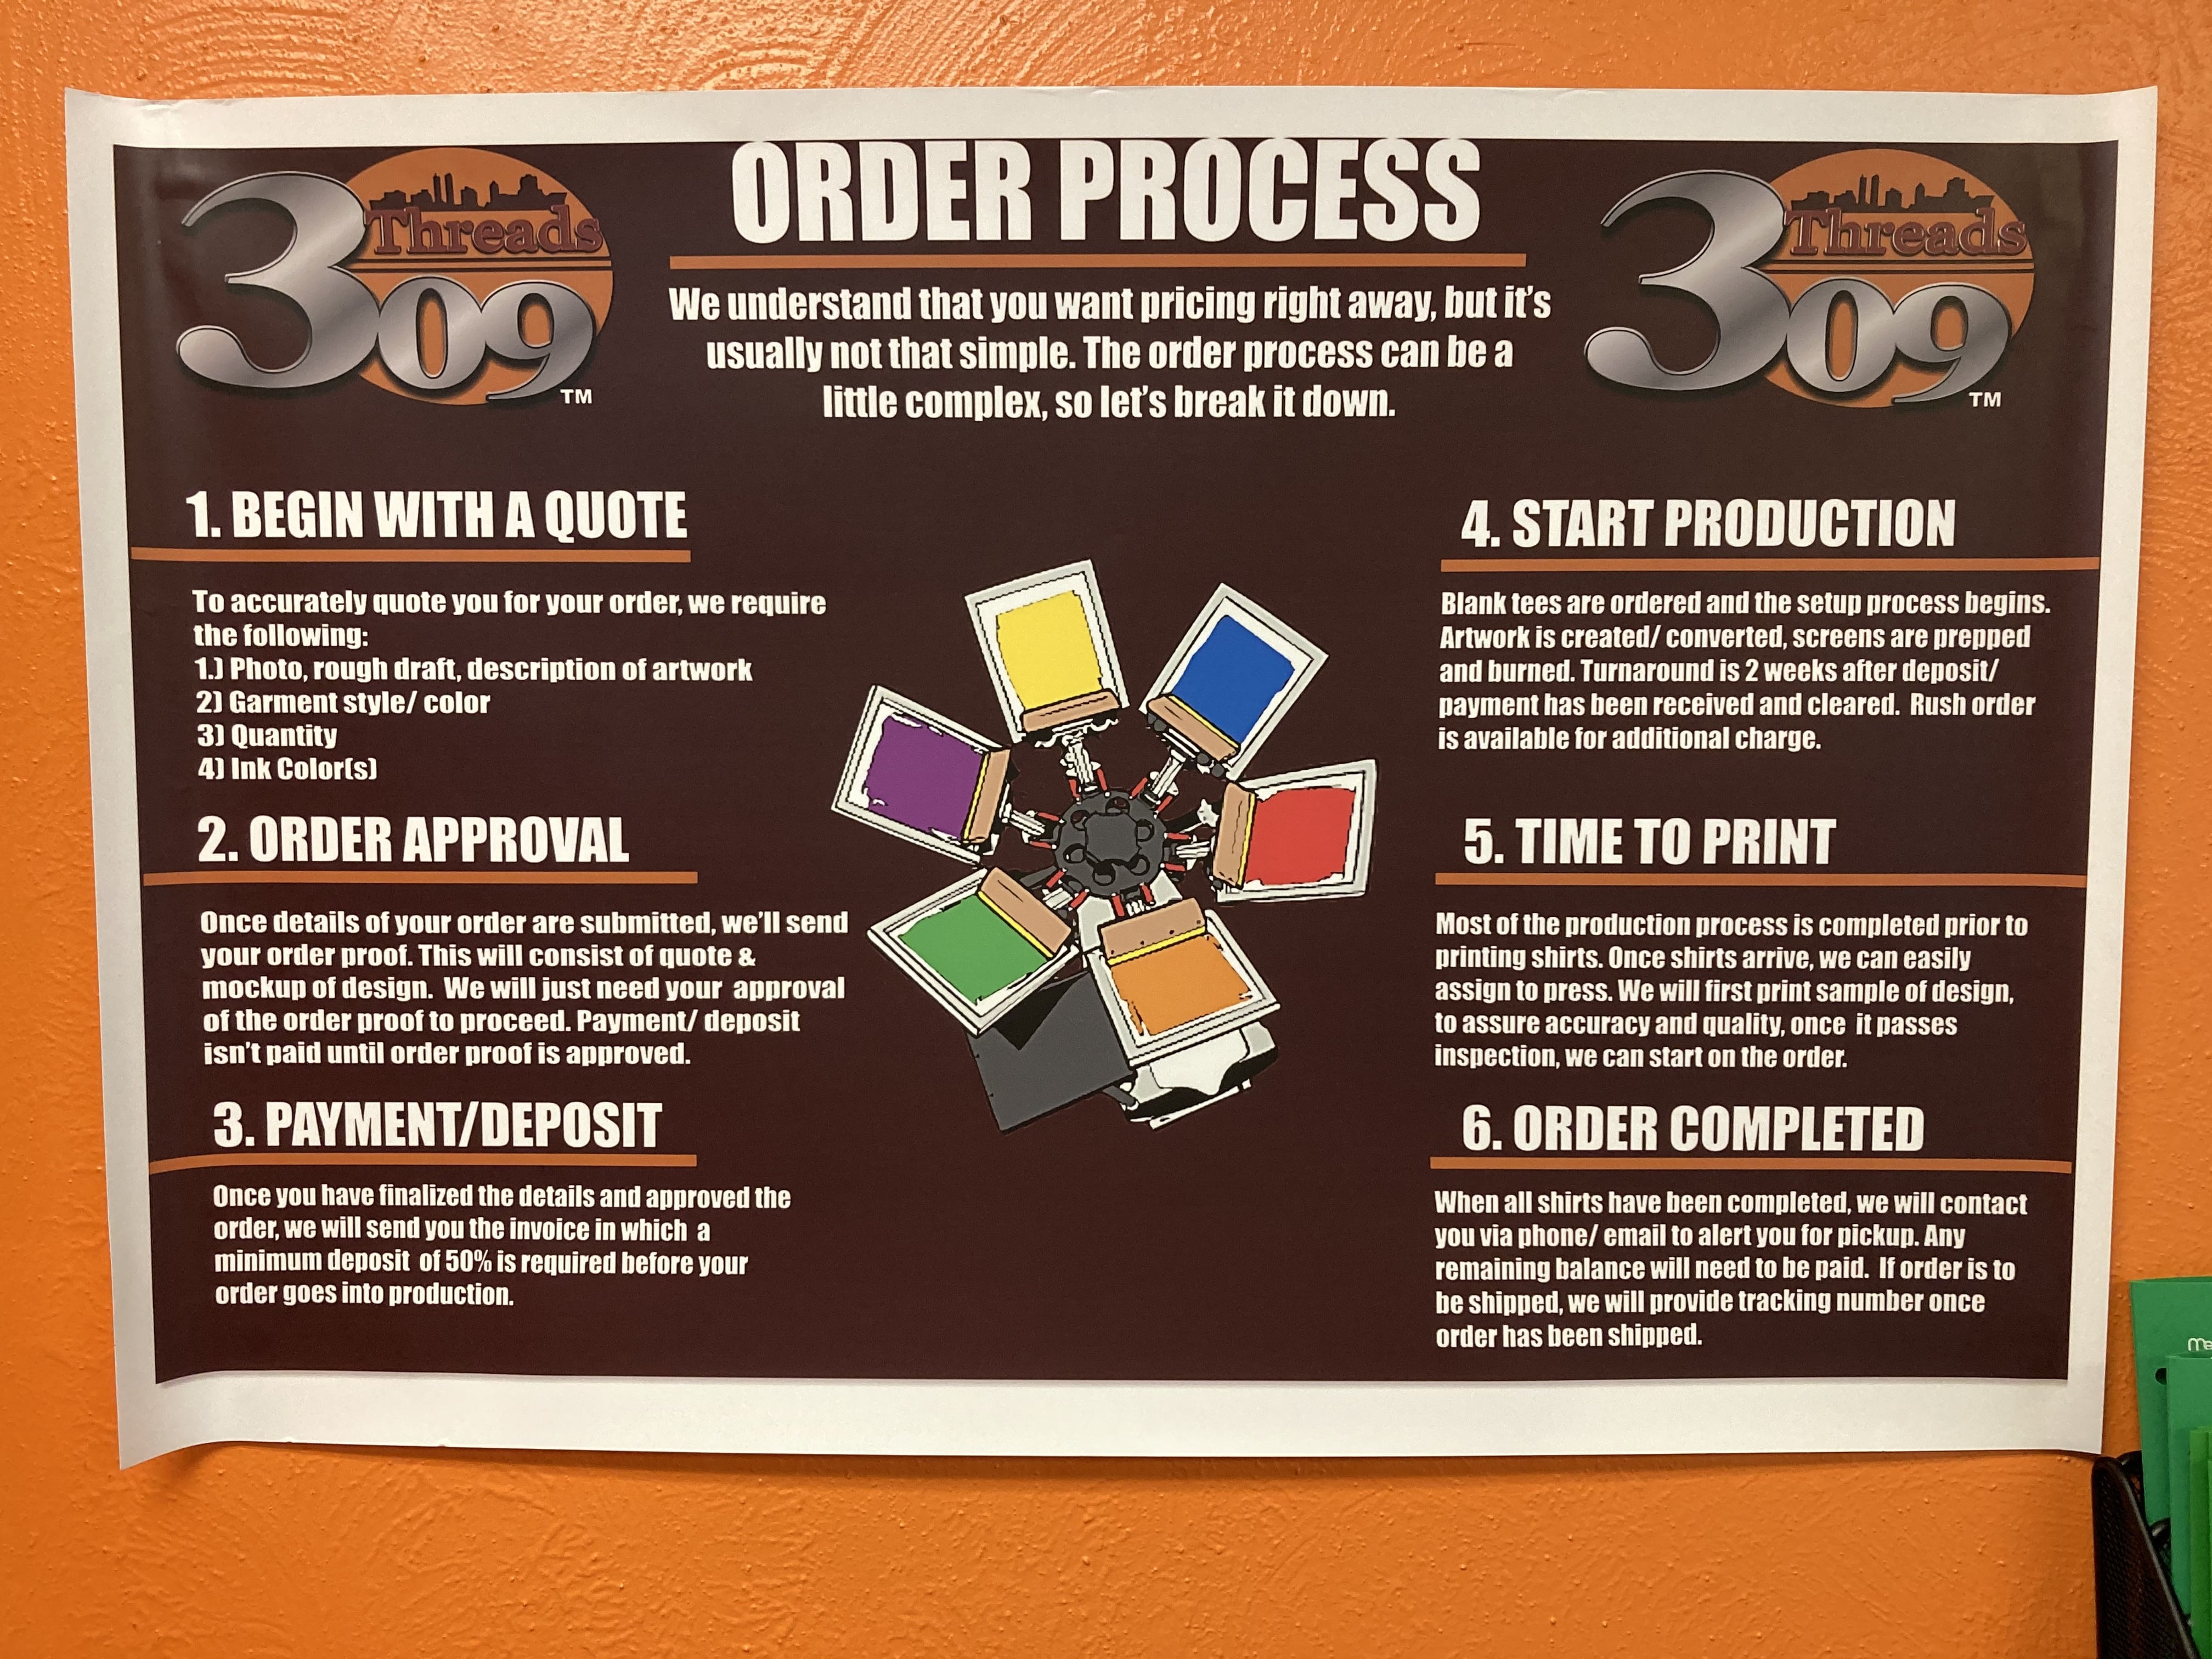 Our steps when processing your orders.